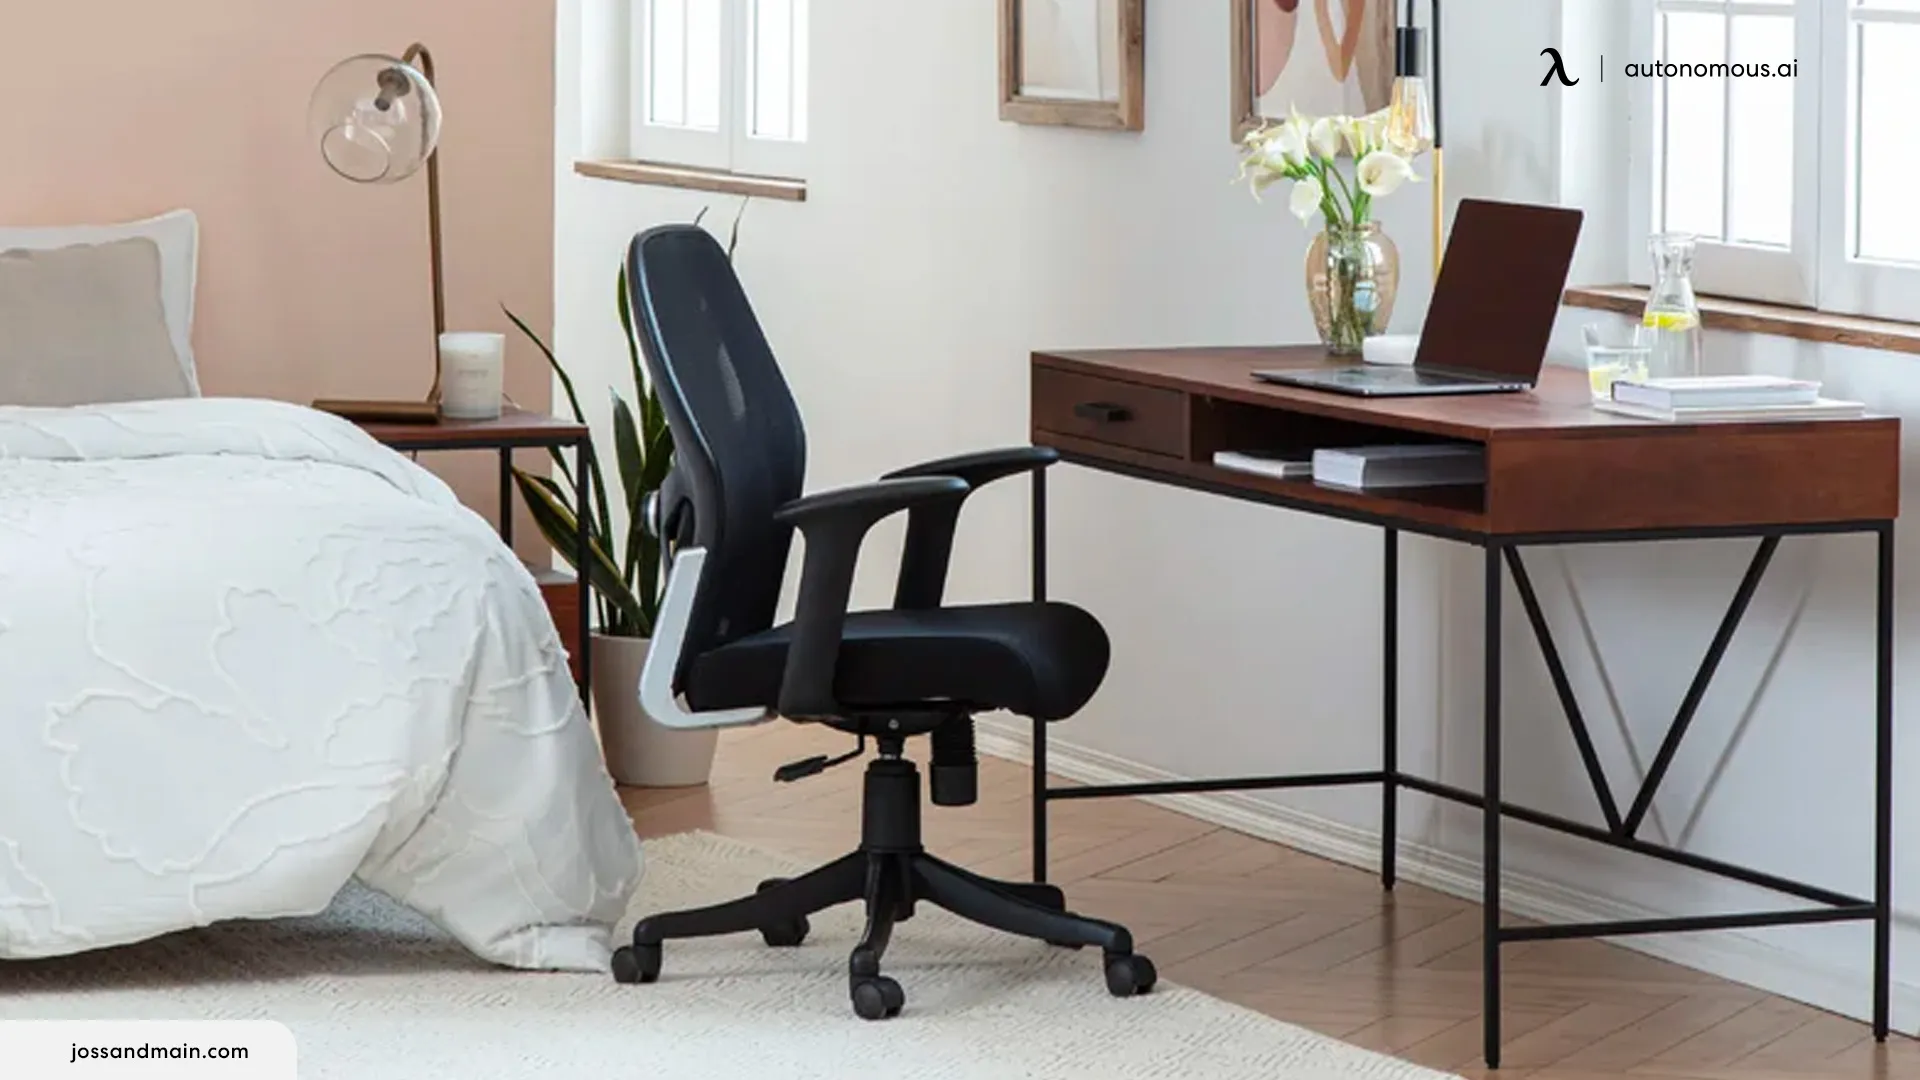 The 5 Best Places to Buy an Office Desk for Sale Online in 2023